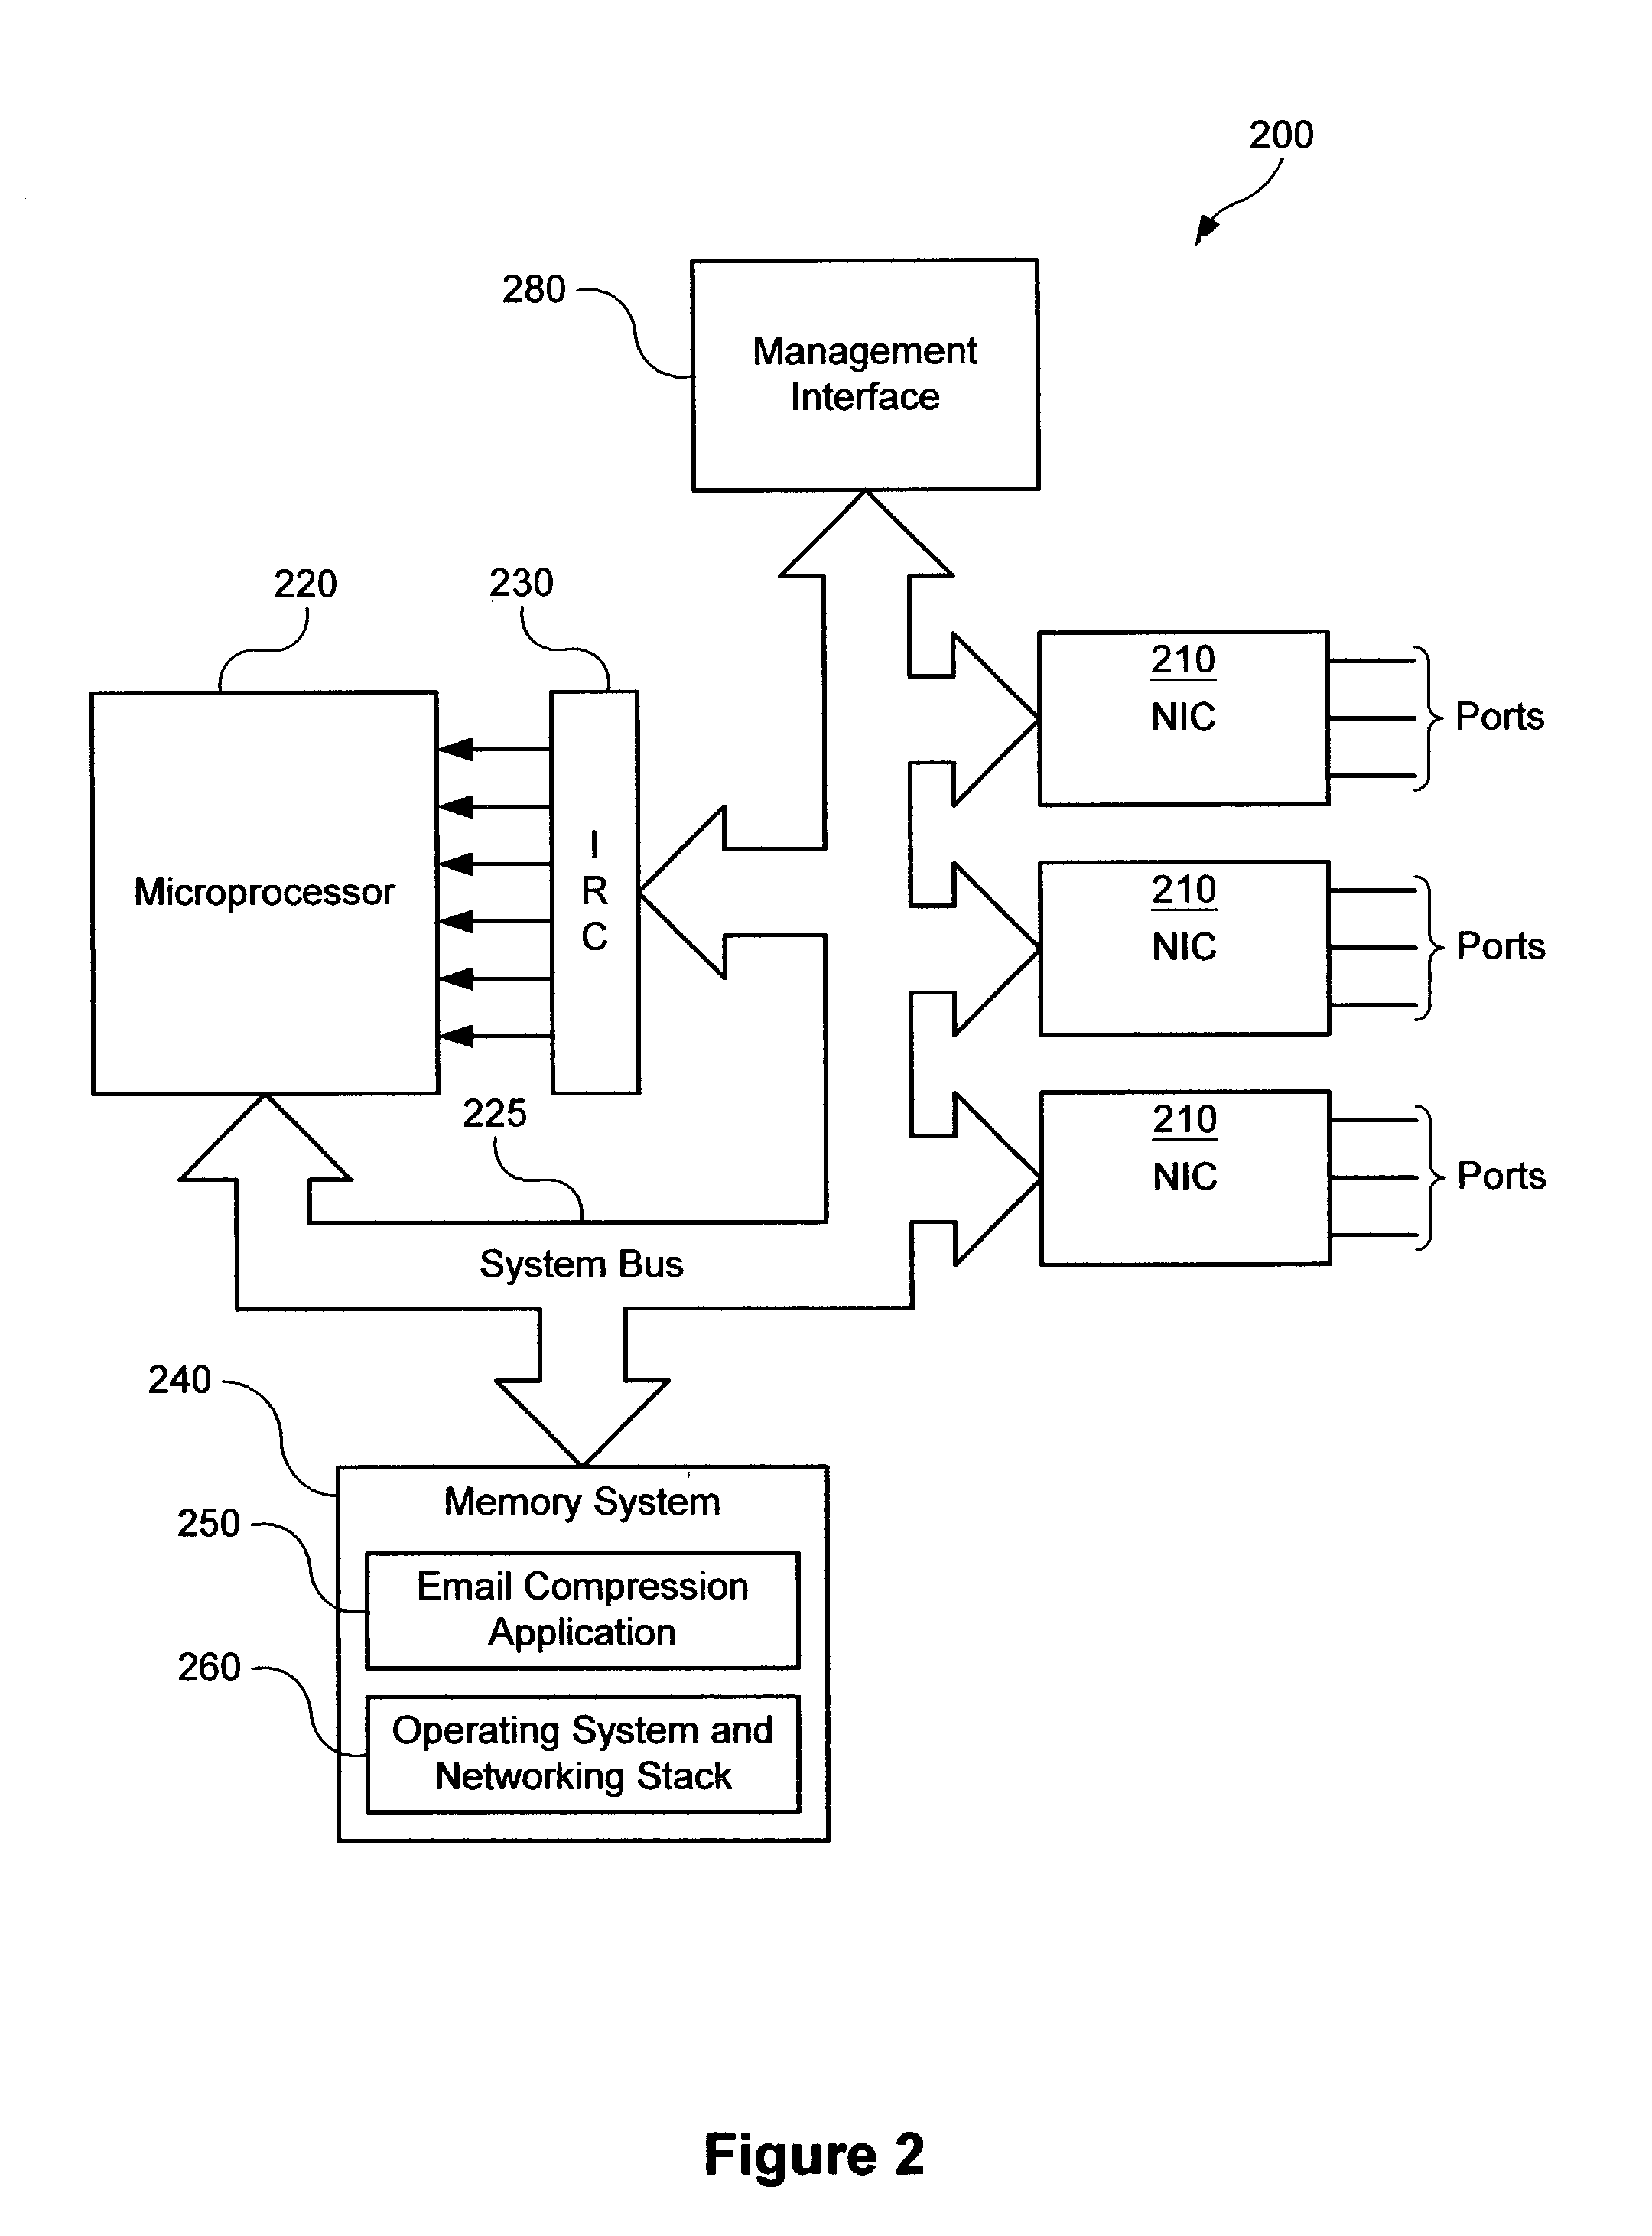 Service-based compression of content within a network communication system